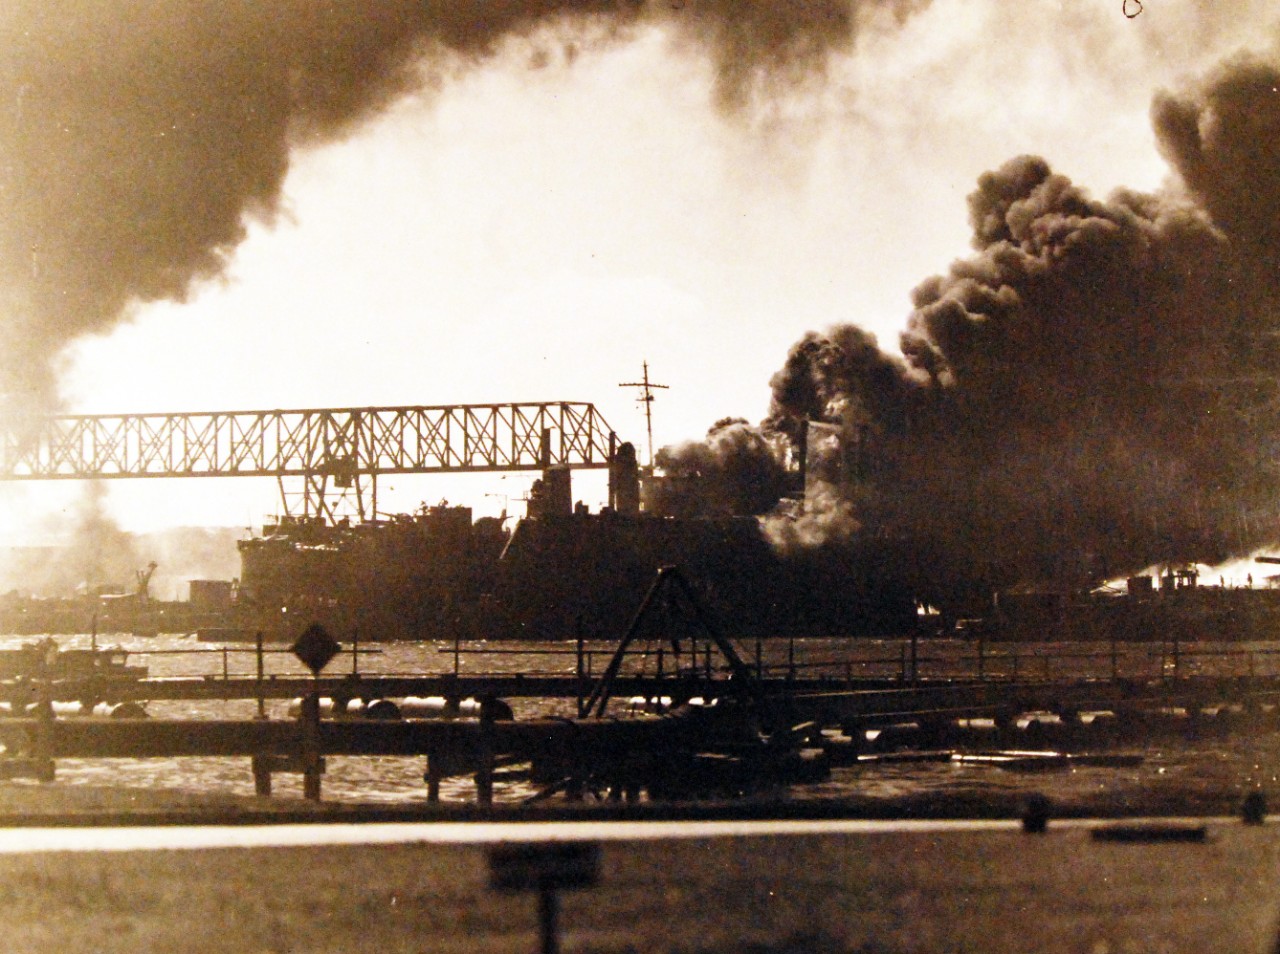 80-G-32775:   Japanese Attack on Pearl Harbor, December 7, 1941.   Ships burning after the attack. Official U.S. Navy photograph, now in the collections of the National Archives. (9/9/2015).